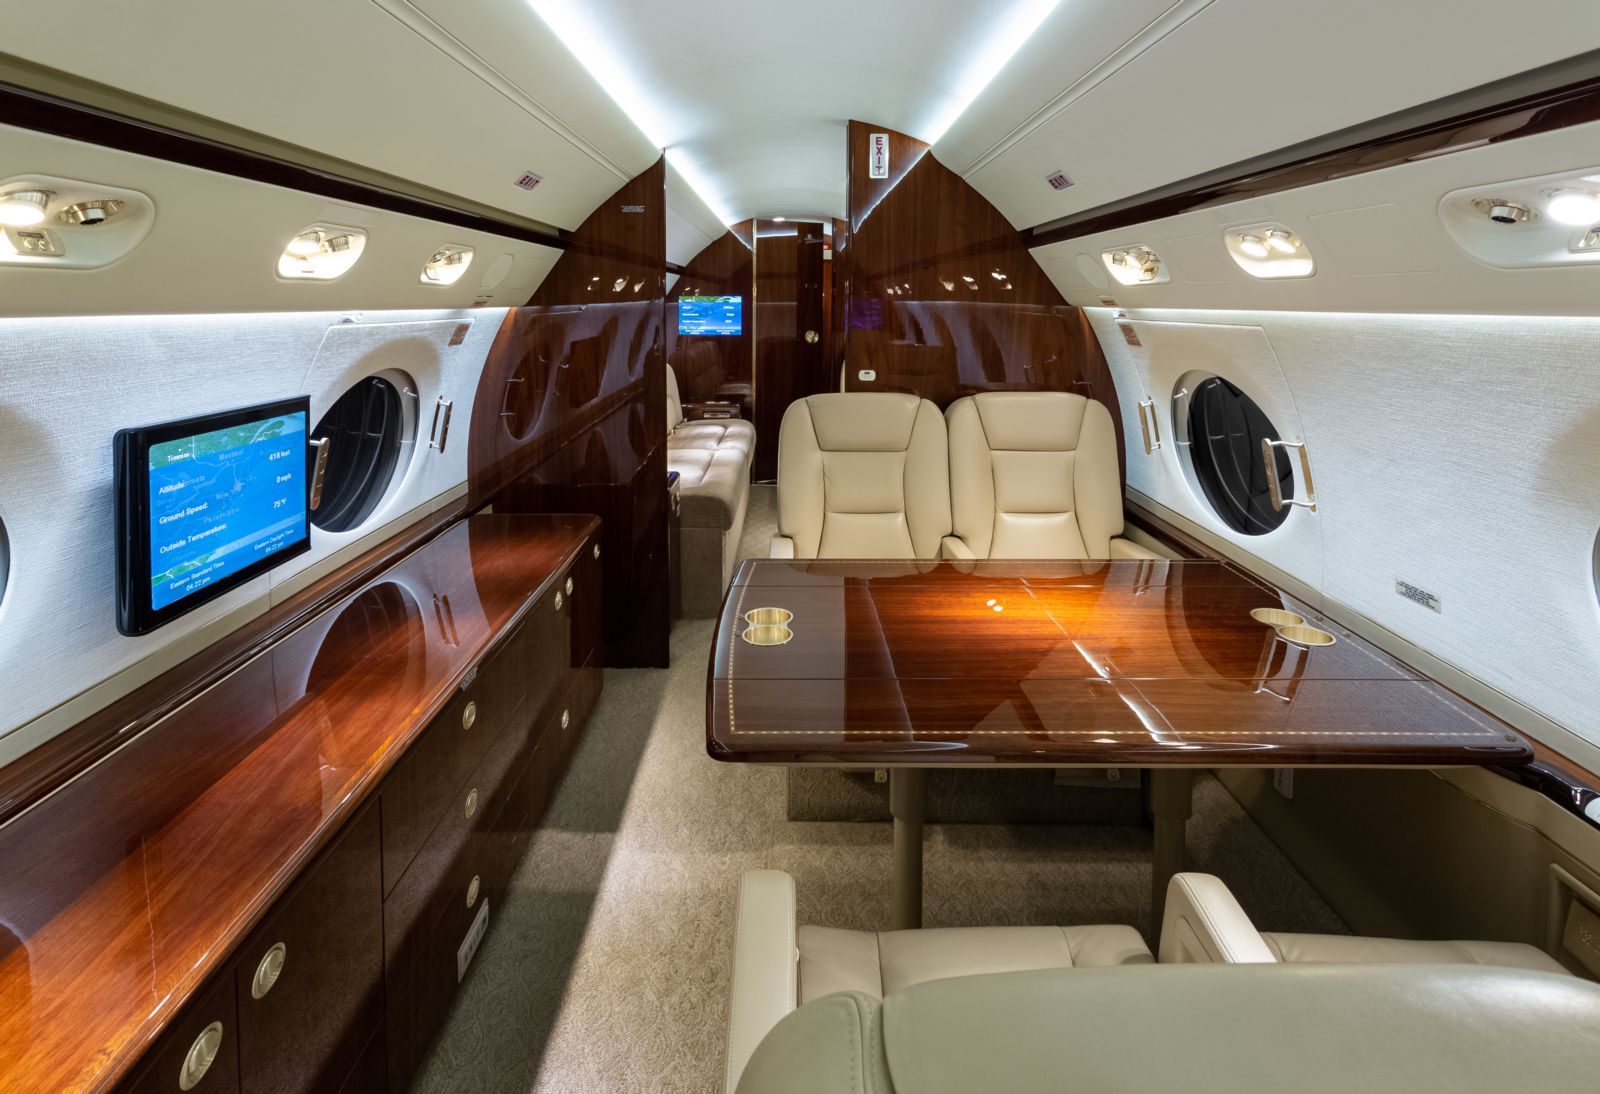 Gulfstream G550  S/N 5438 for sale | gallery image: /userfiles/images/5438/bfp_6330.jpg